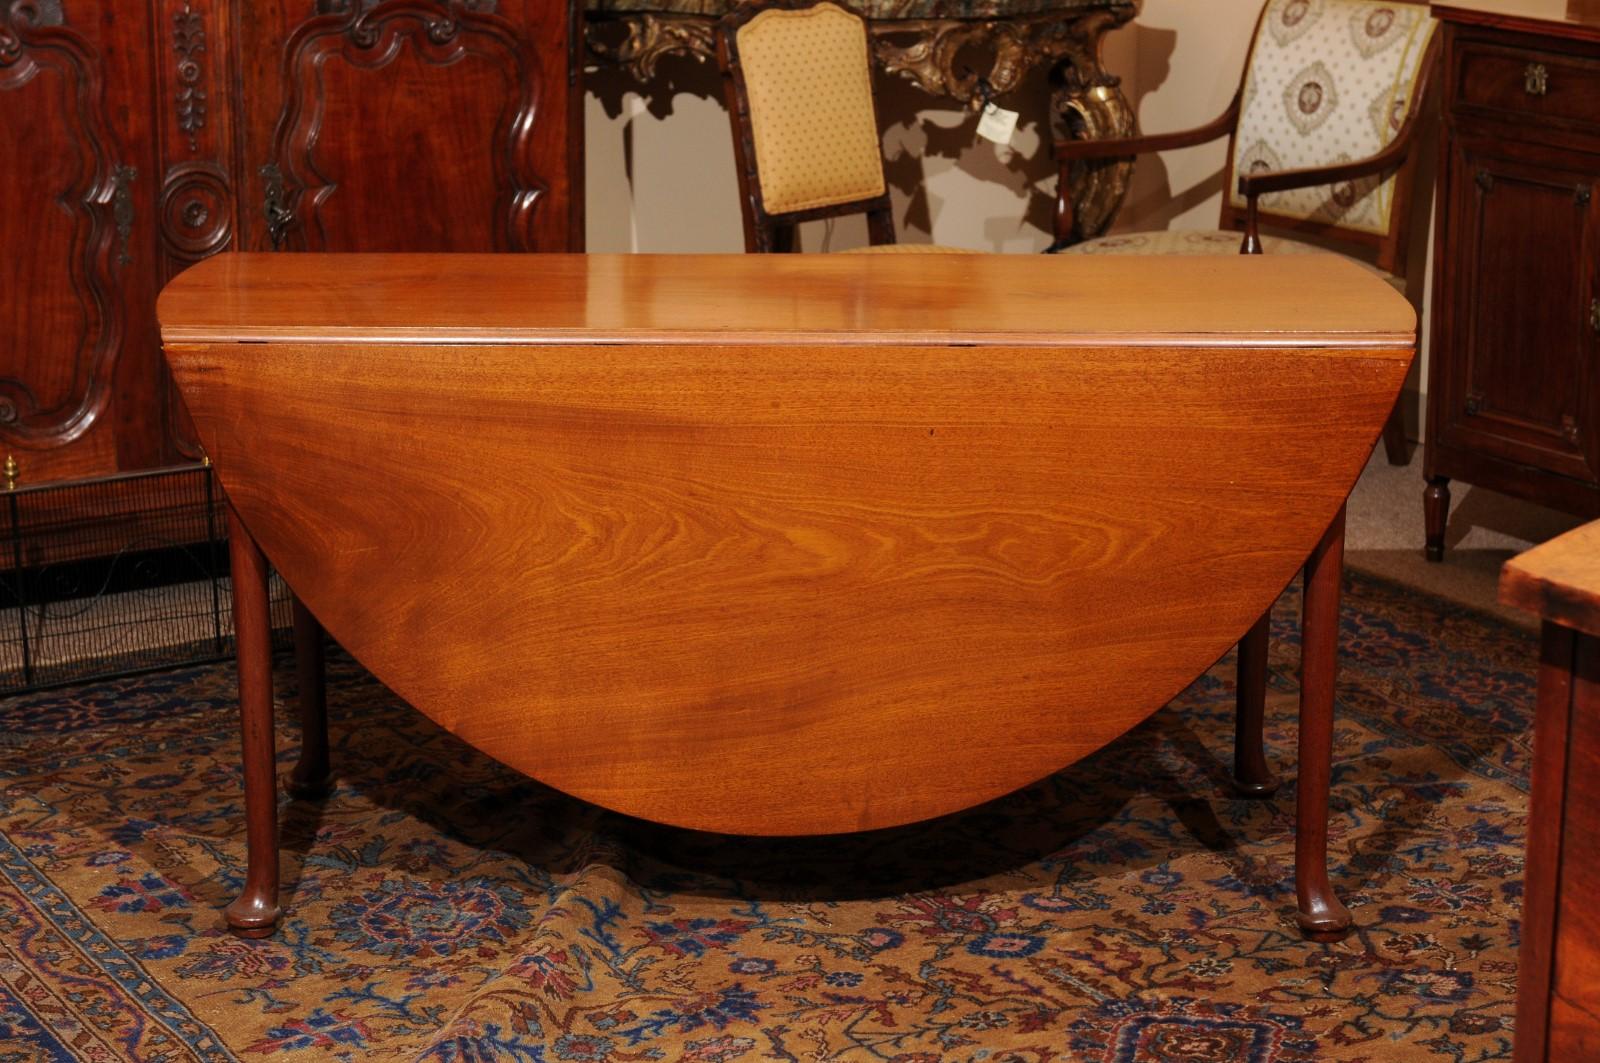  Mid-18th C English George II Mahogany Drop Leaf Oval Dining Table with Pad Feet (Table de salle à manger ovale à feuilles tombantes et pieds pad) en vente 3